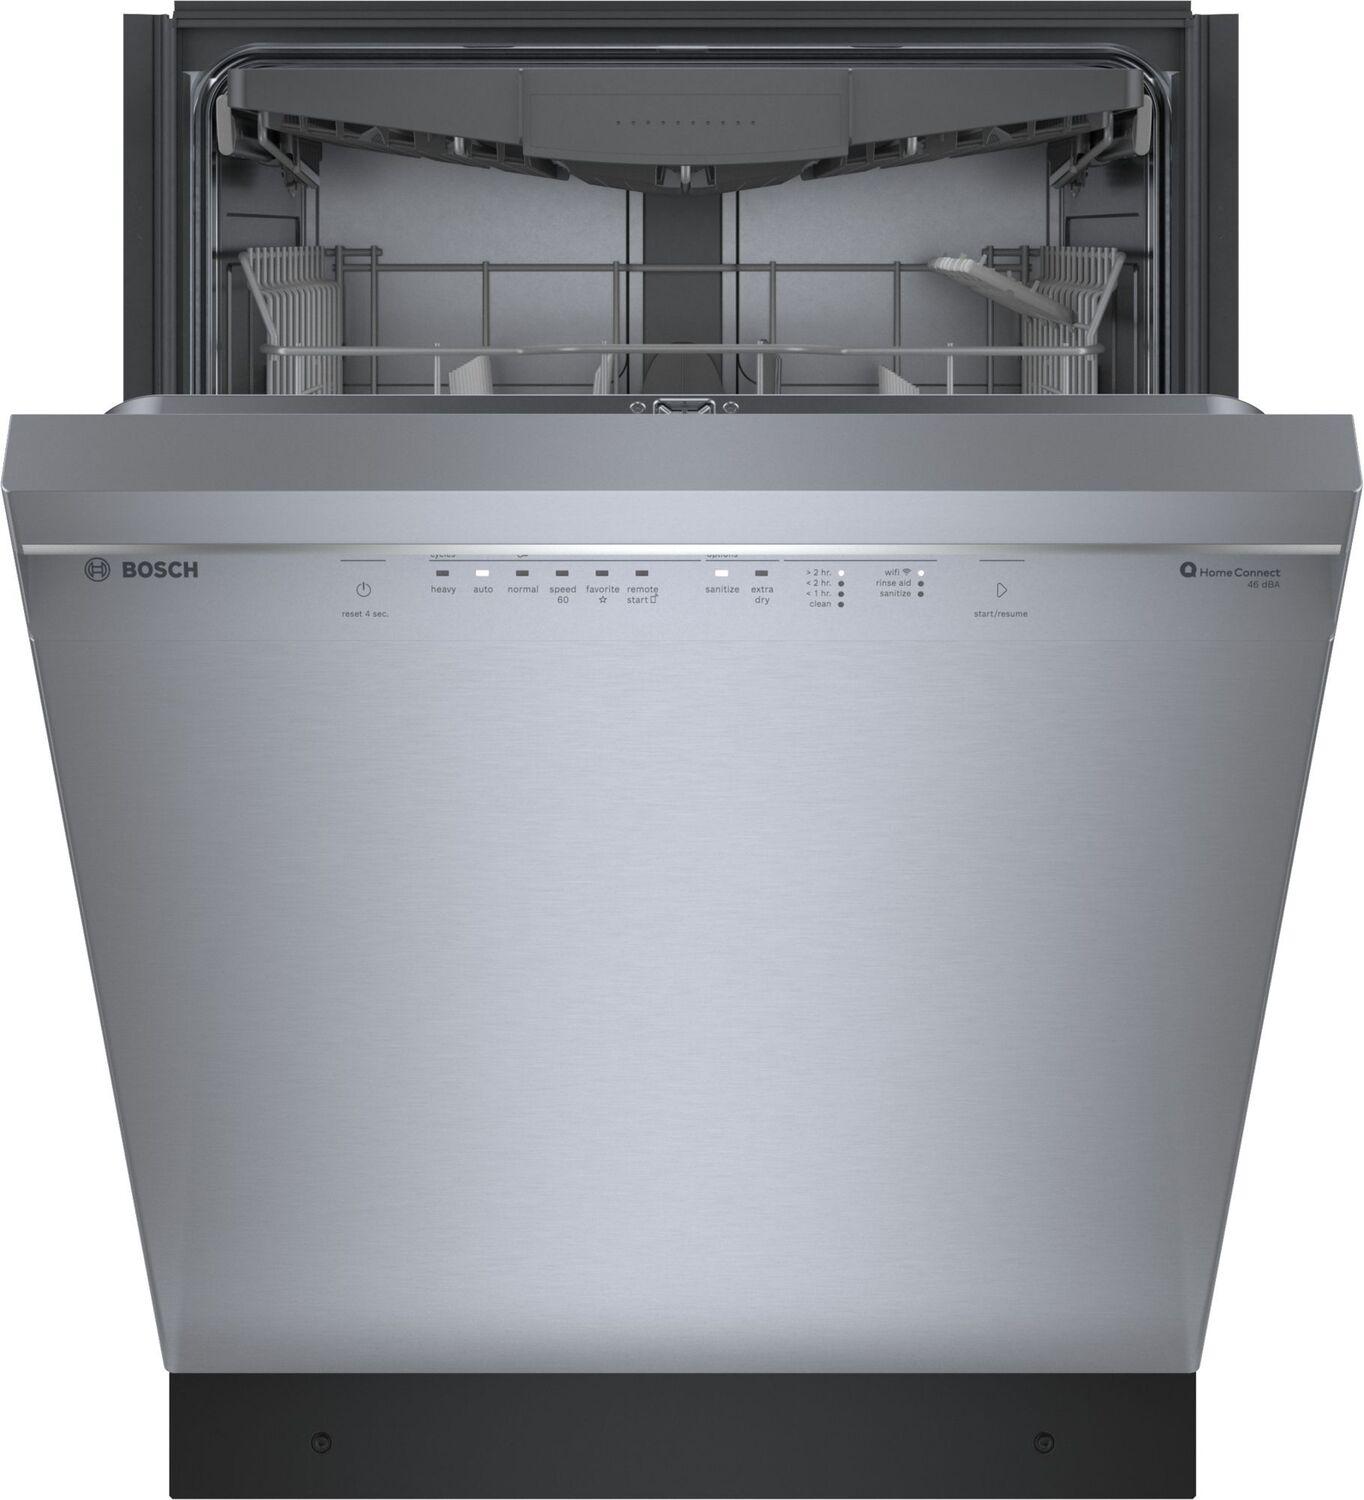 Bosch SHE53C85N 300 Series Dishwasher 24" Stainless Steel